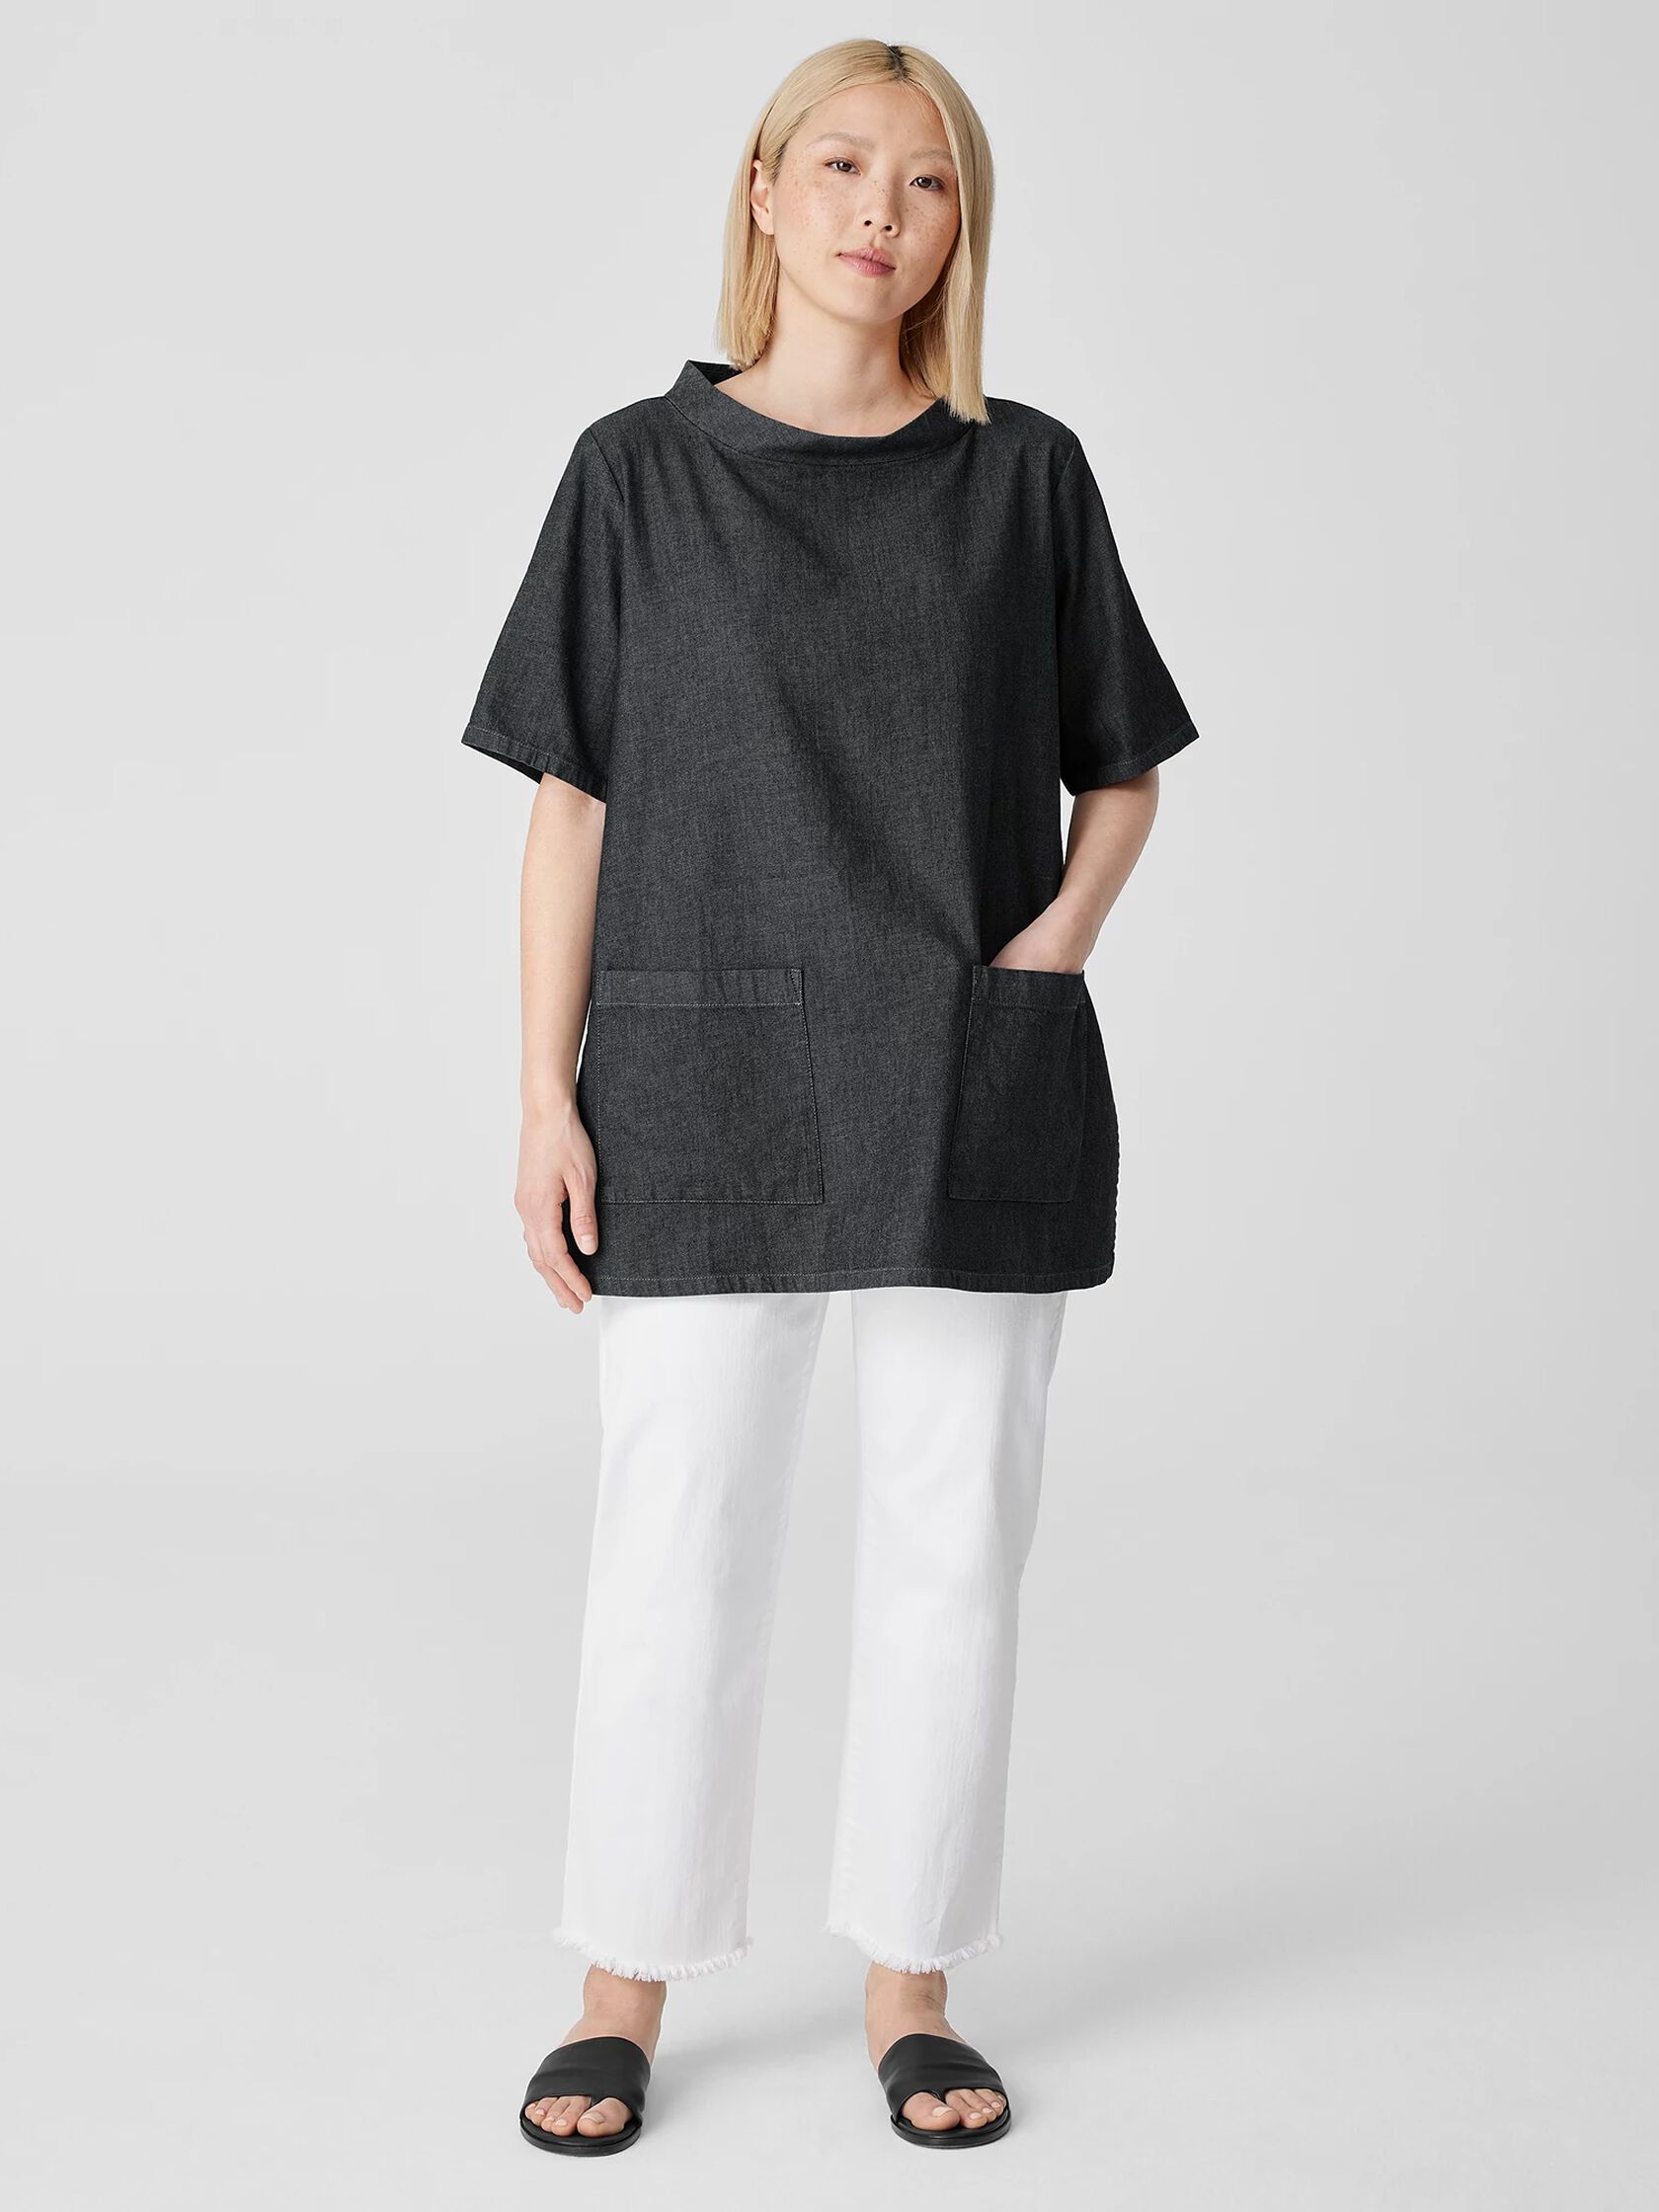 Airy Organic Cotton Twill Mock Neck Long Top